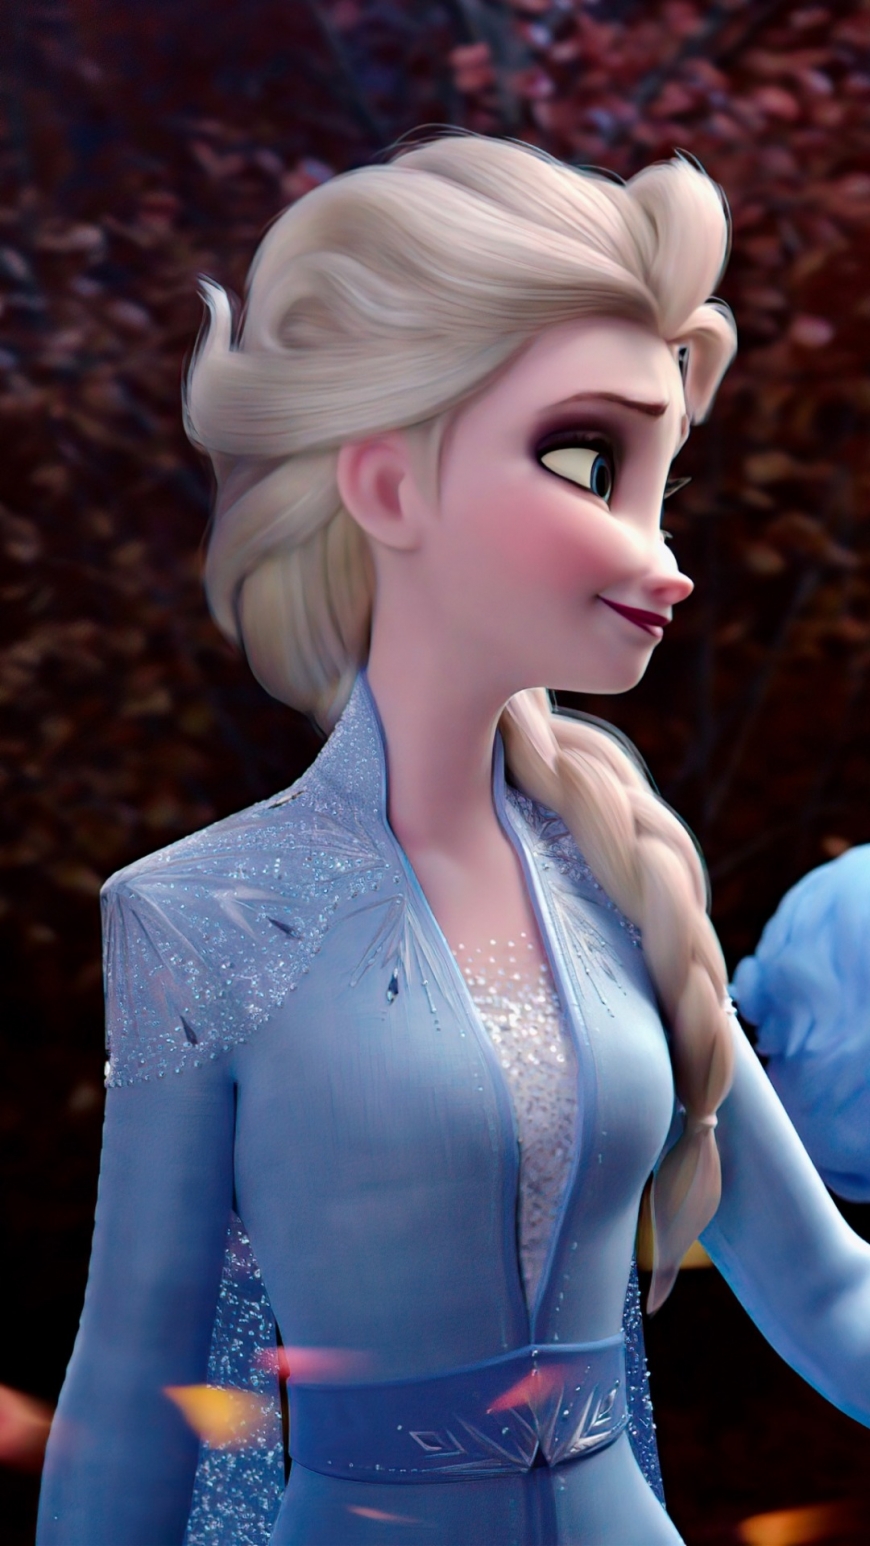 Lots Of Big And Beautiful Pictures Of Elsa From Frozen Movie